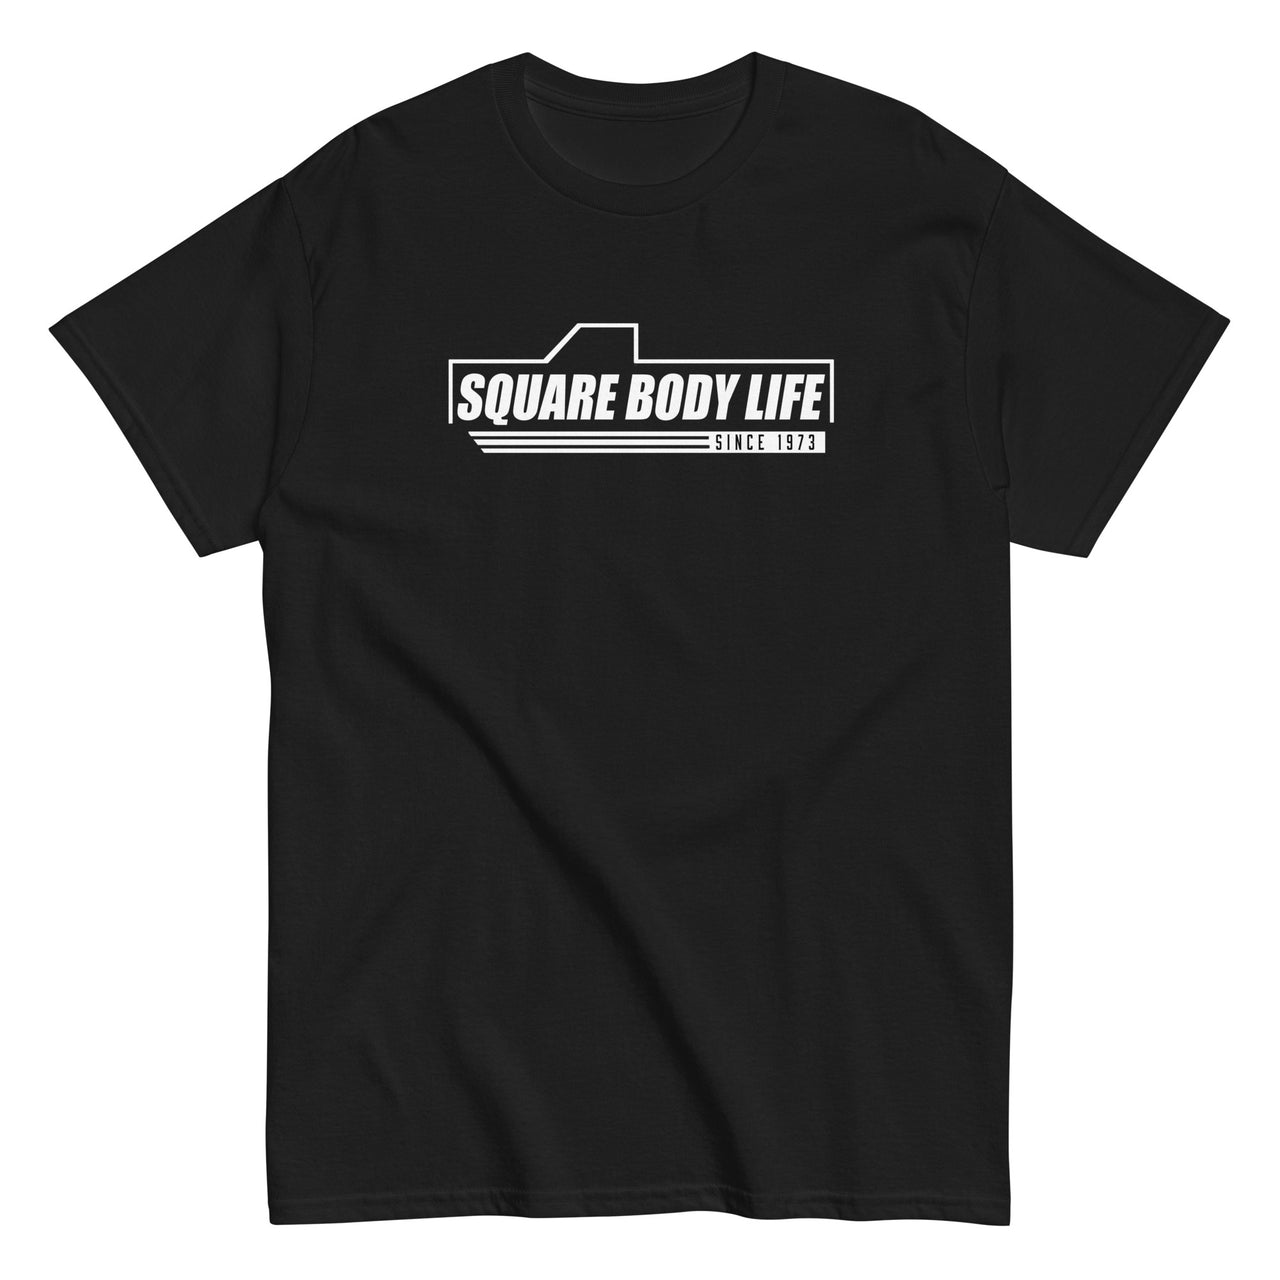 Square Body Life Truck T-Shirt in black